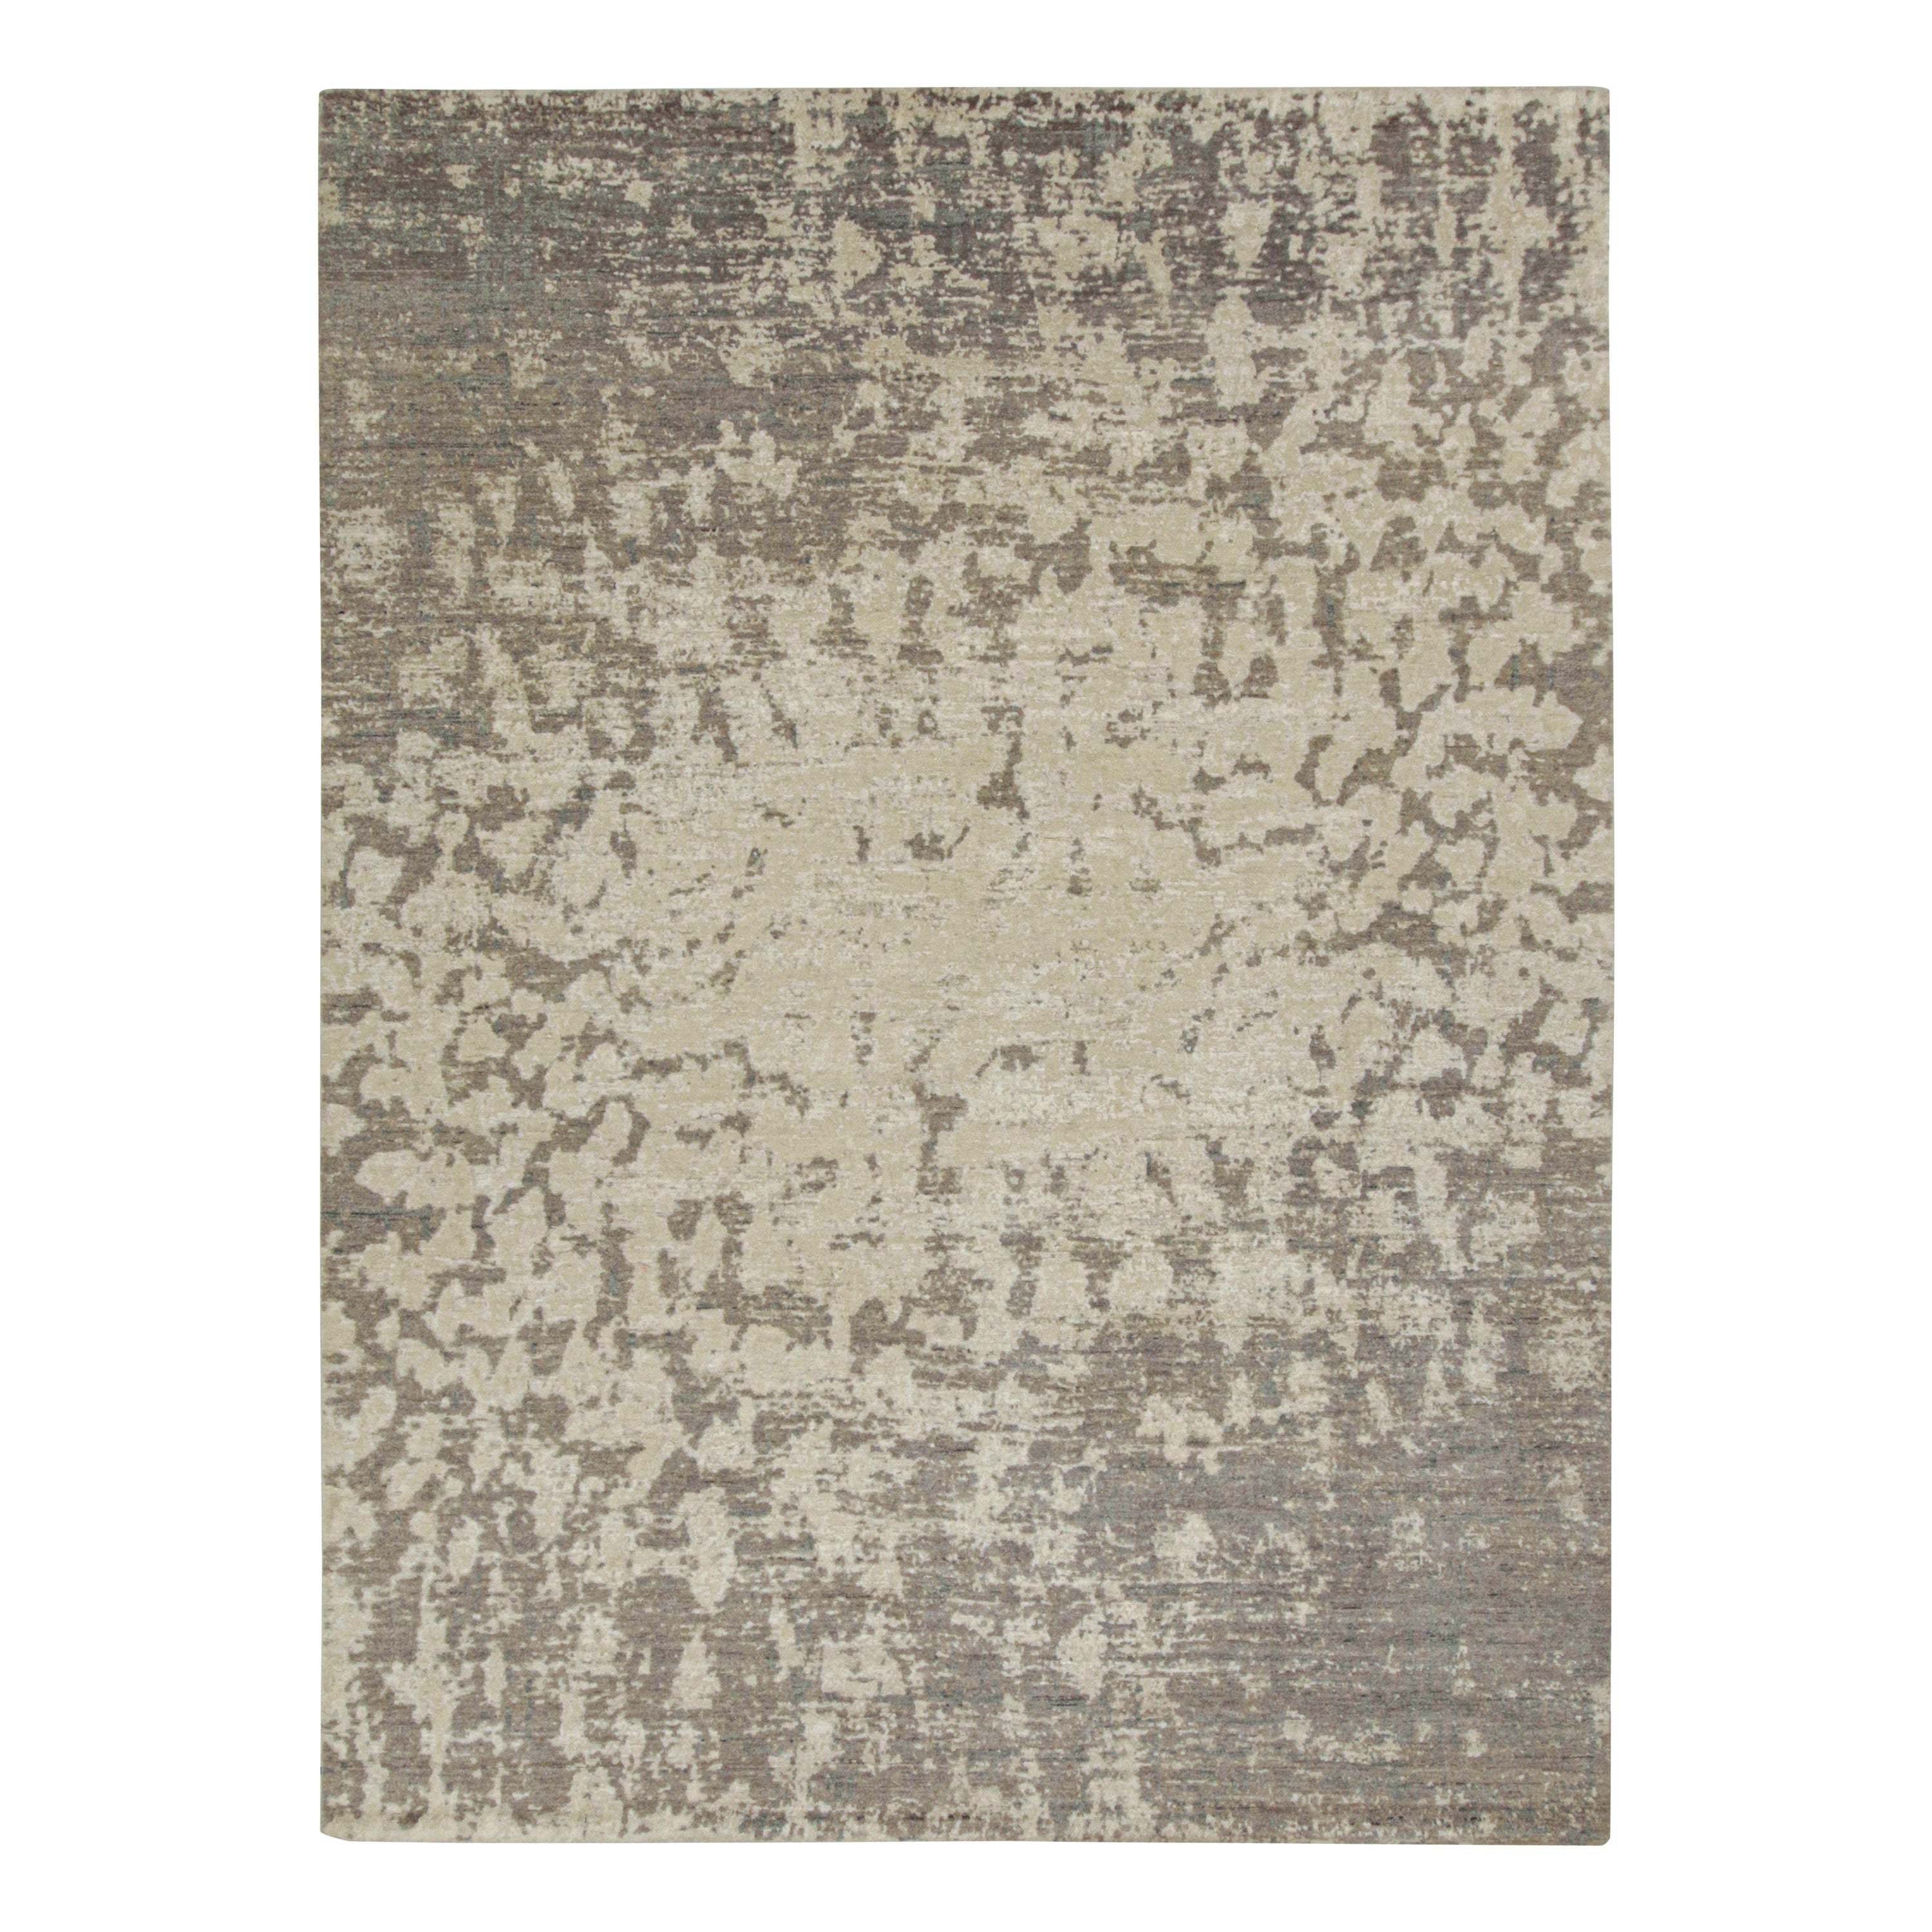 Rug & Kilim’s Modern Abstract Rug in Beige-Brown and Gray Patterns